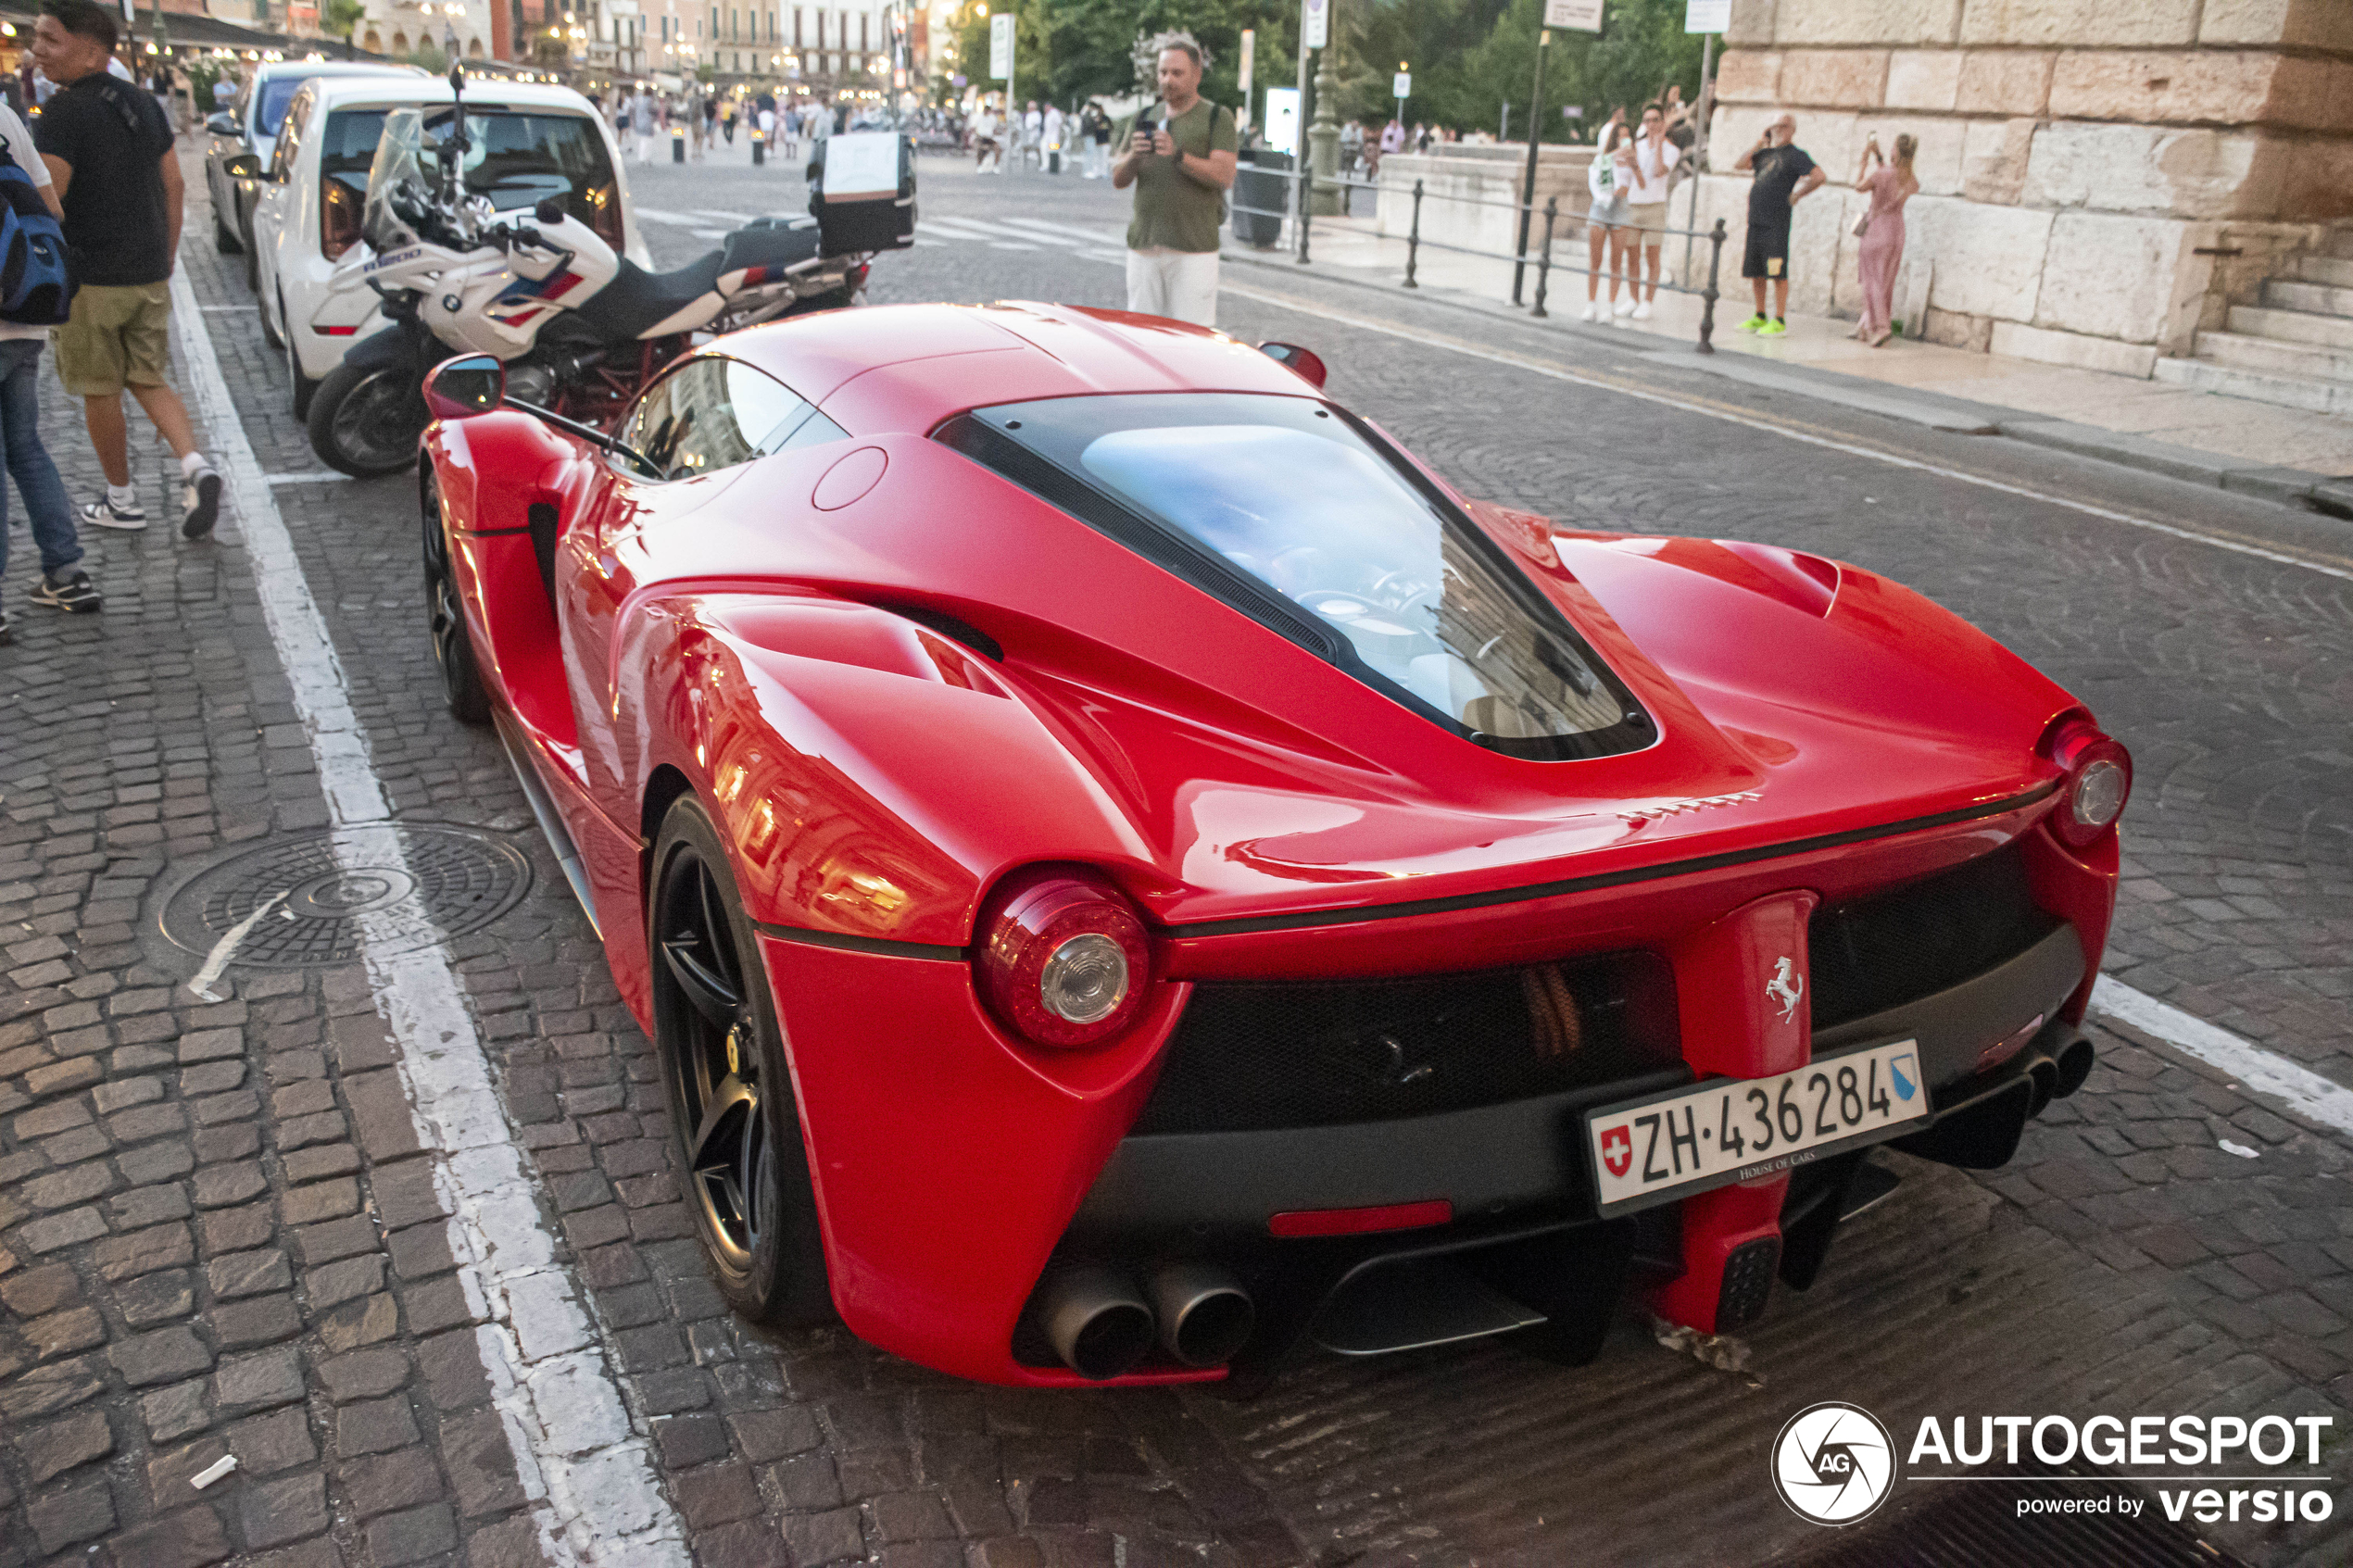 A rare Laferrari with a bodycolored roof shows up in Verona